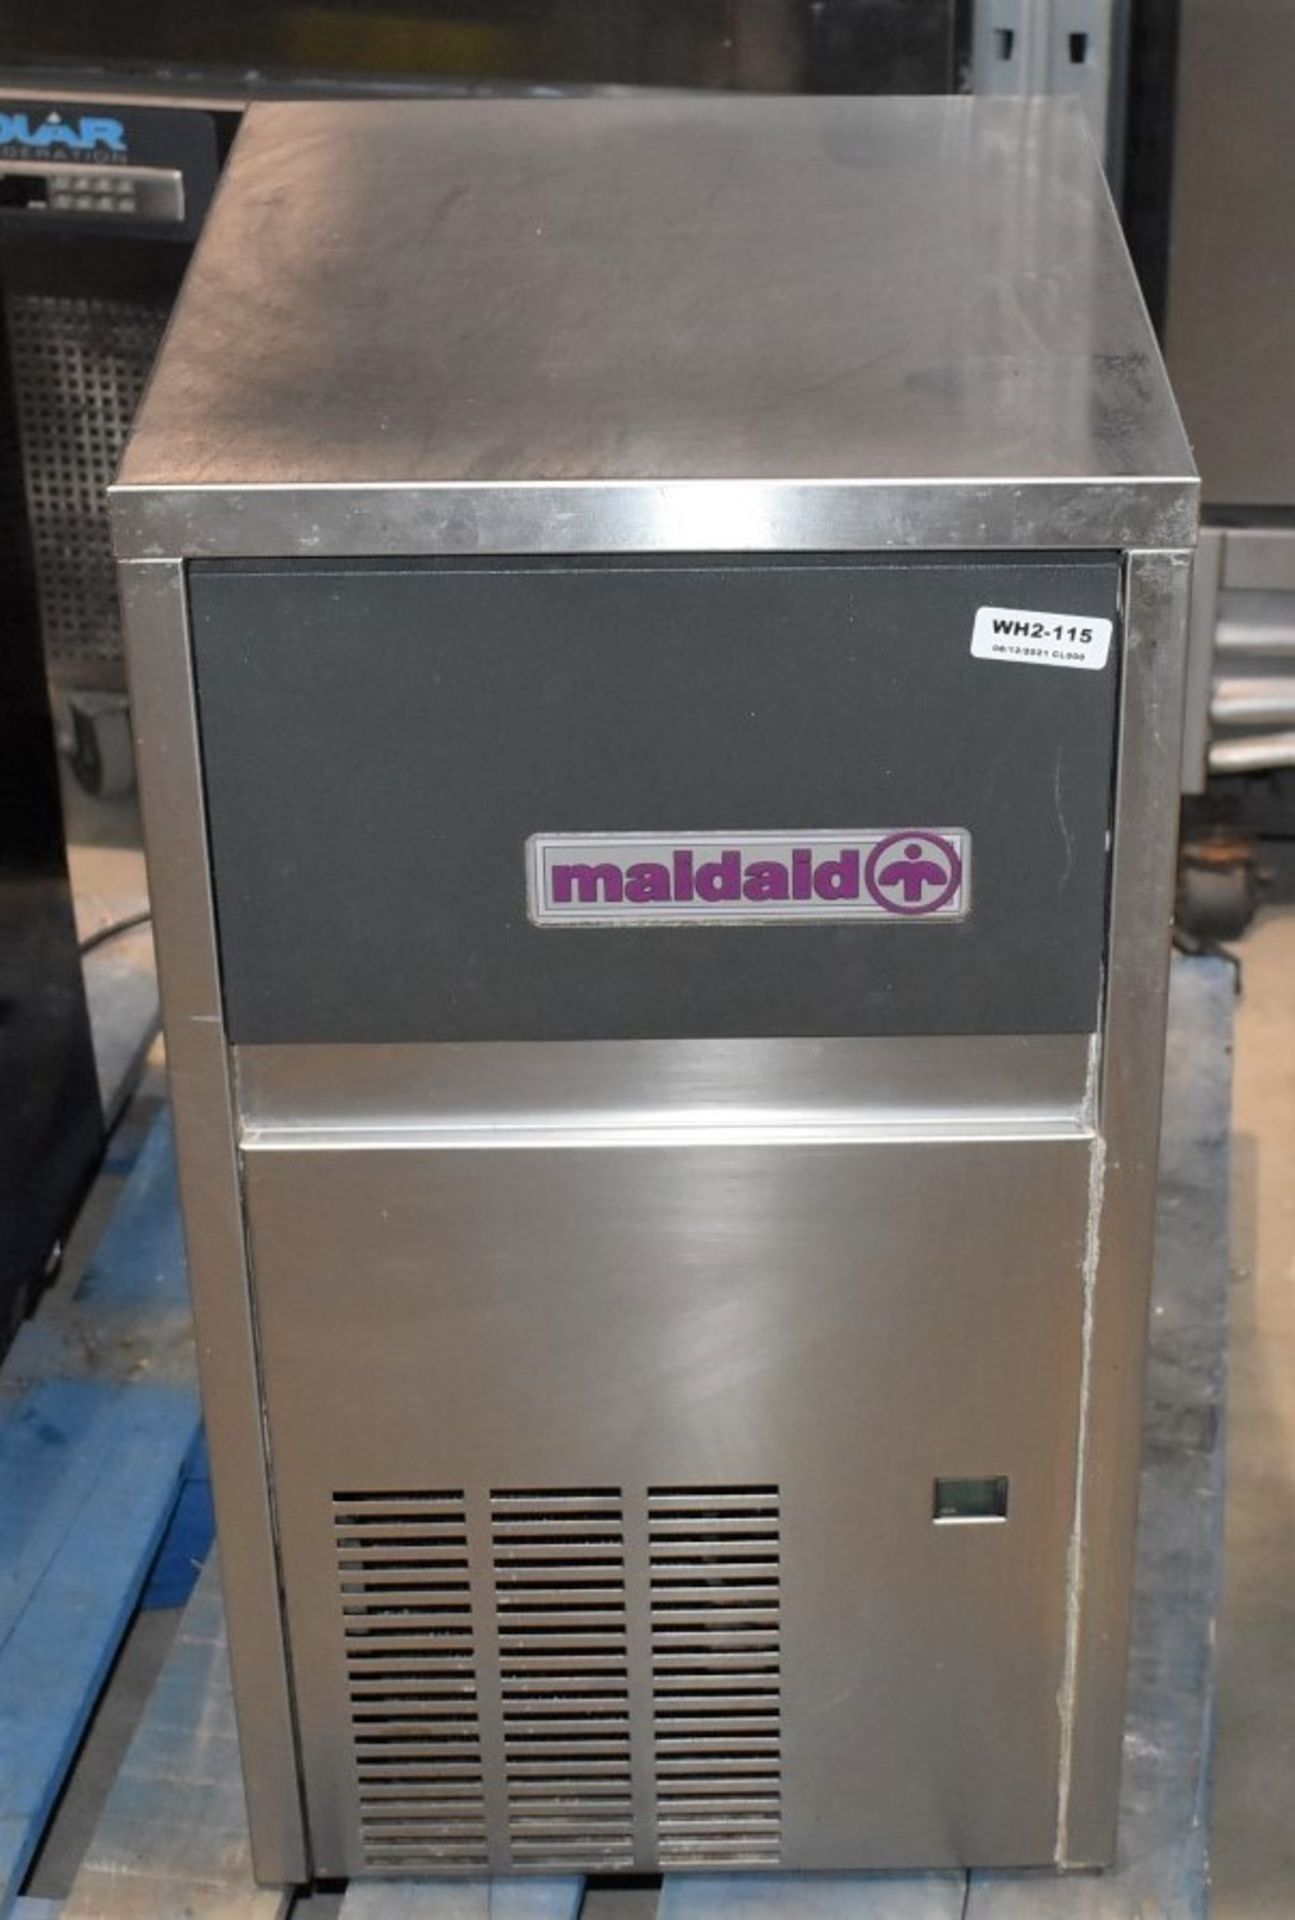 1 x Maidaid M30-10 Countertop Ice Machine With Stainless Steel Exterior - RRP £975 - Ref: WH2-115 - Image 9 of 9